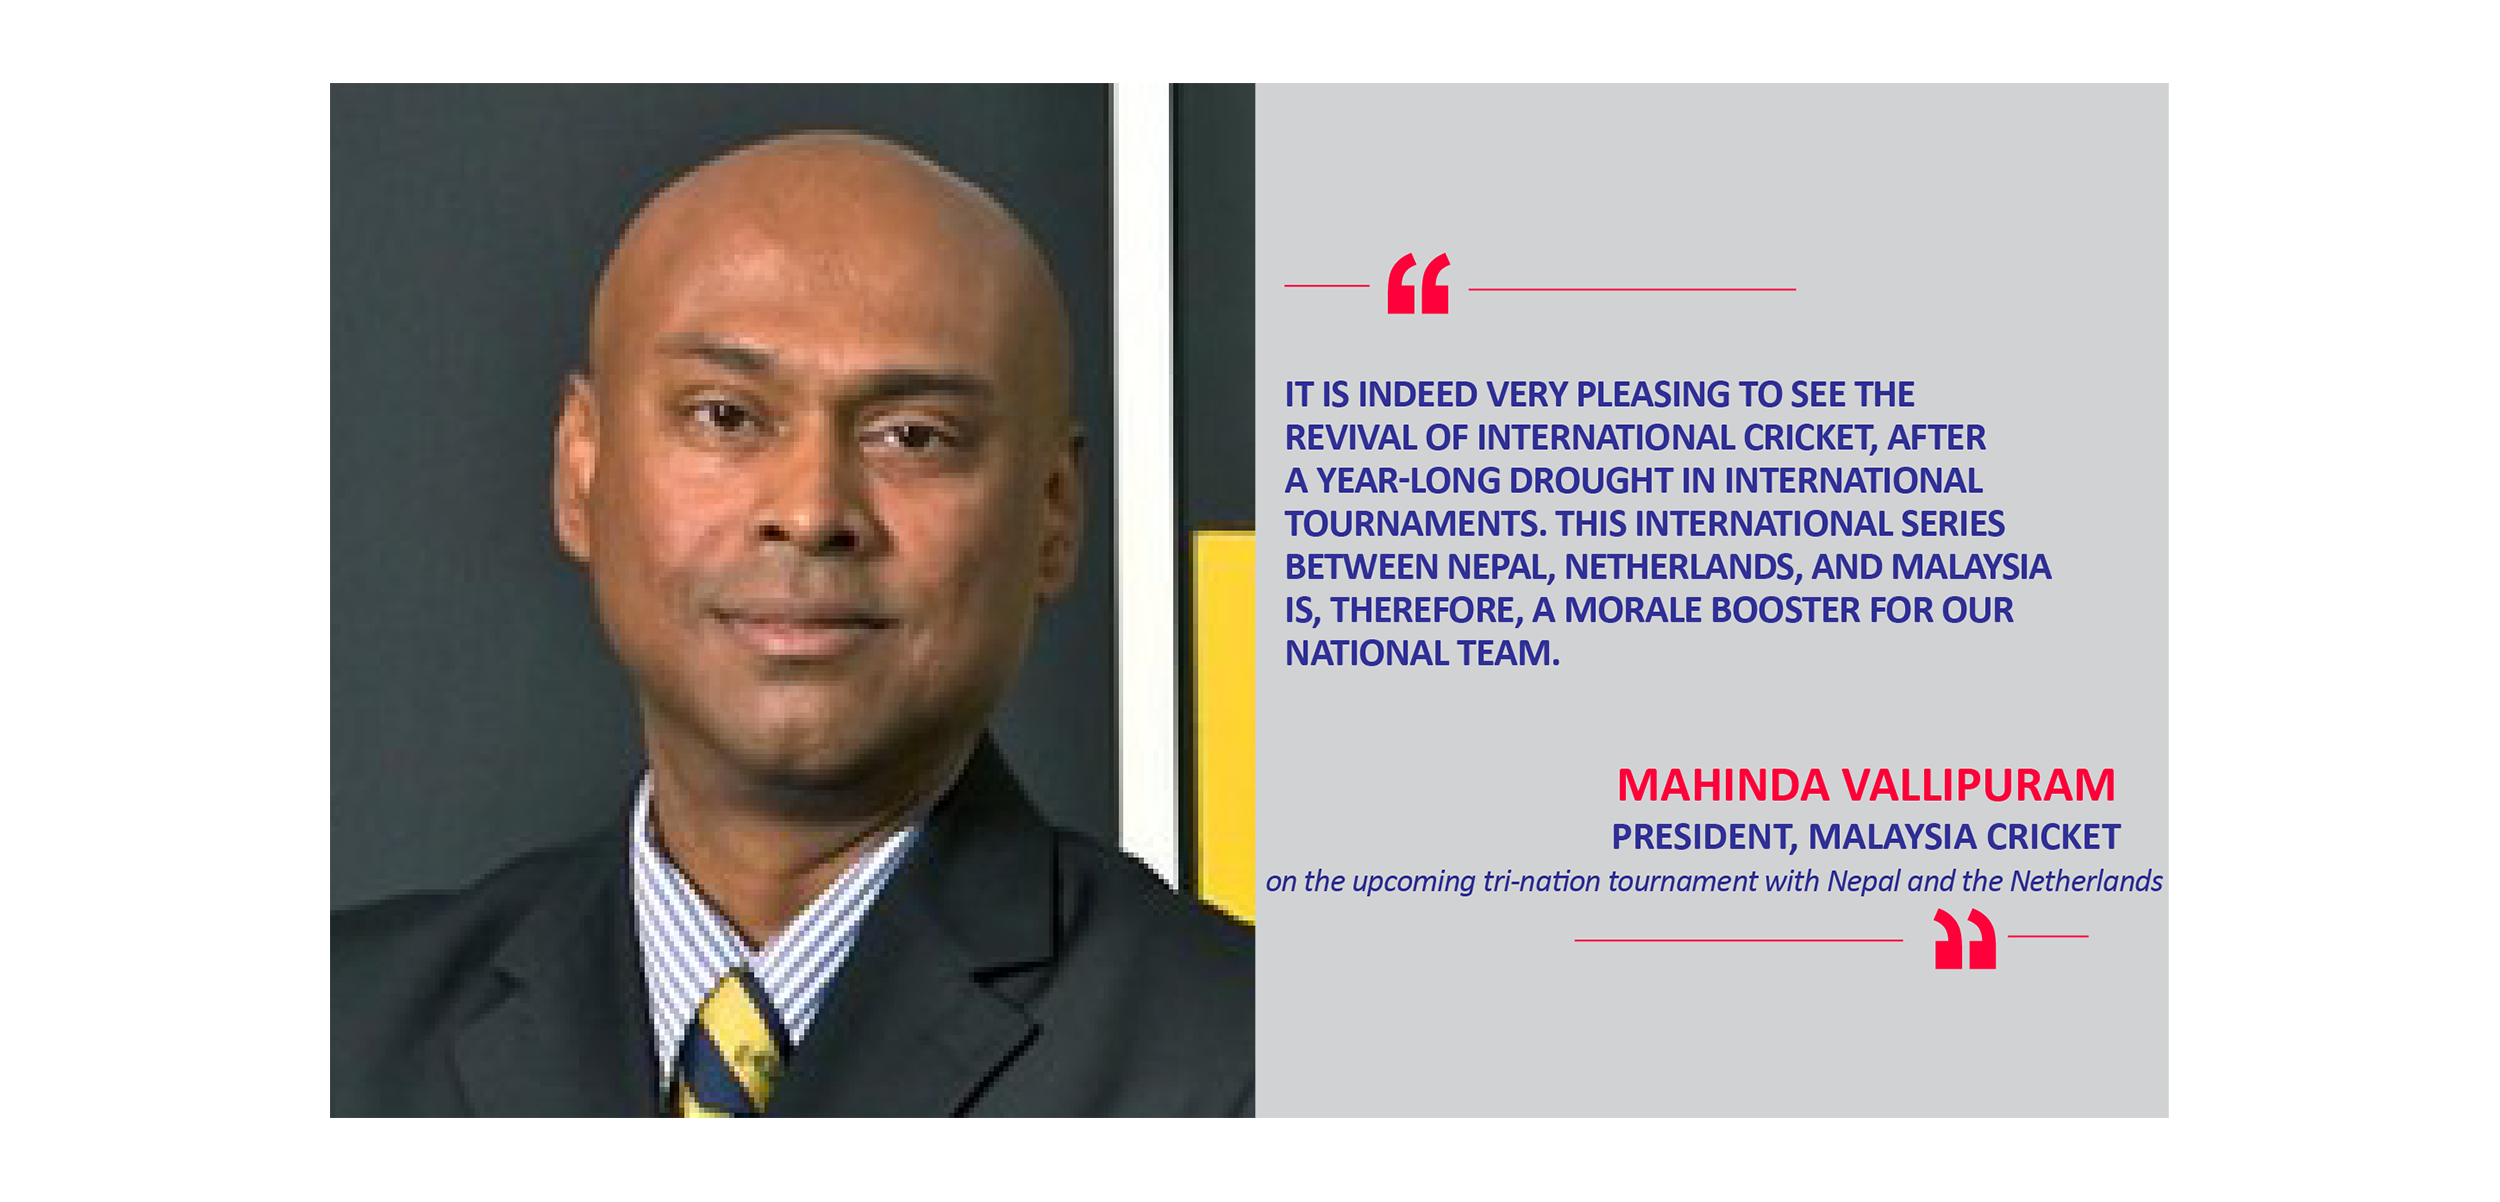 Mahinda Vallipuram, President, Malaysia Cricket on the upcoming tri-nation tournament with Nepal and the Netherlands